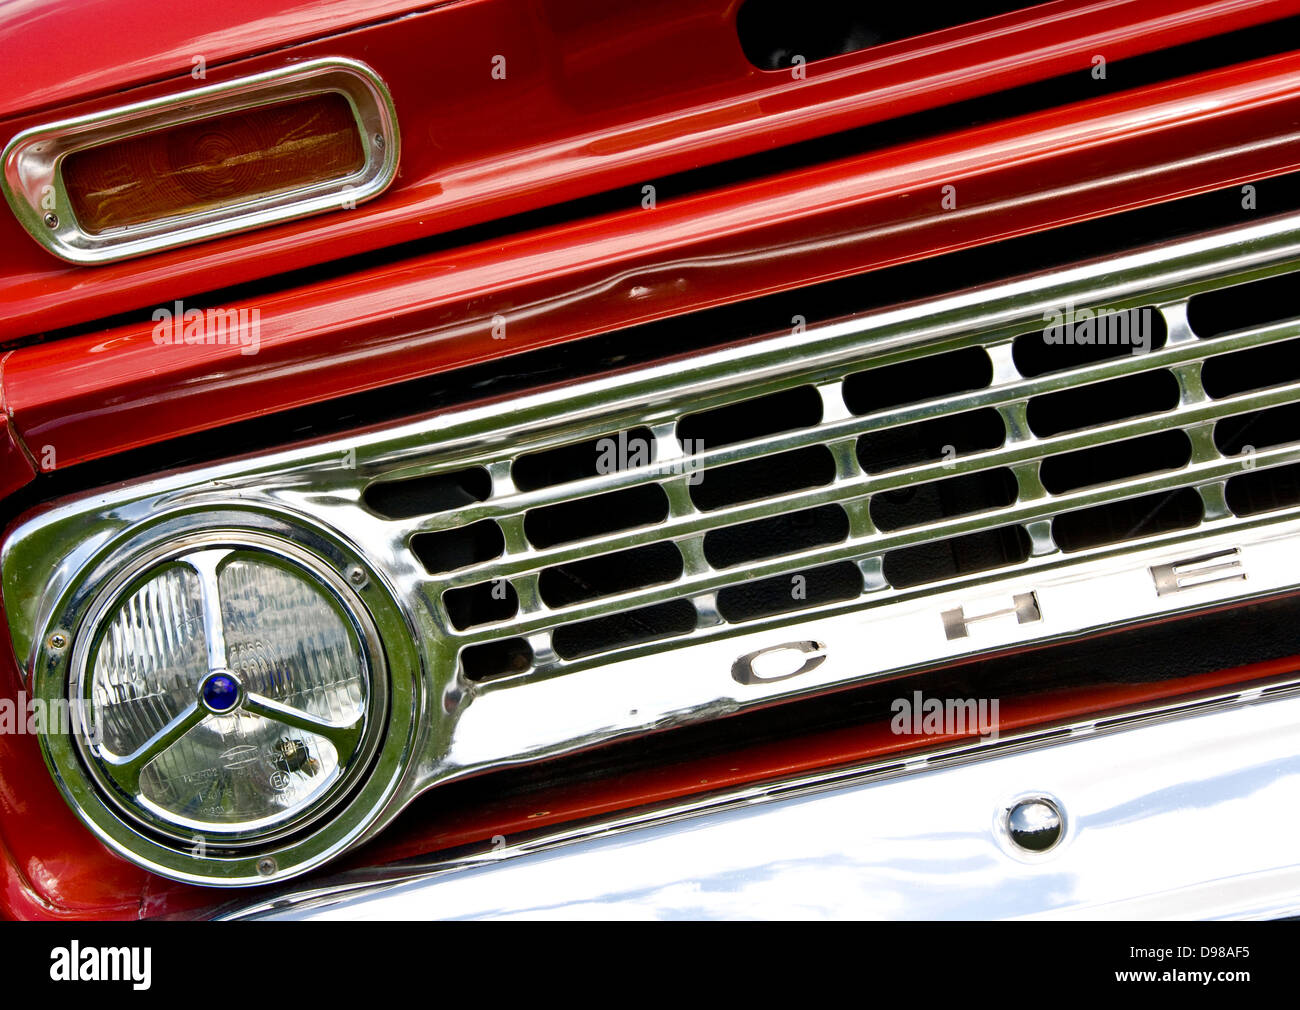 1960's Classic Chevrolet pickup truck front grill and headlight Stock Photo